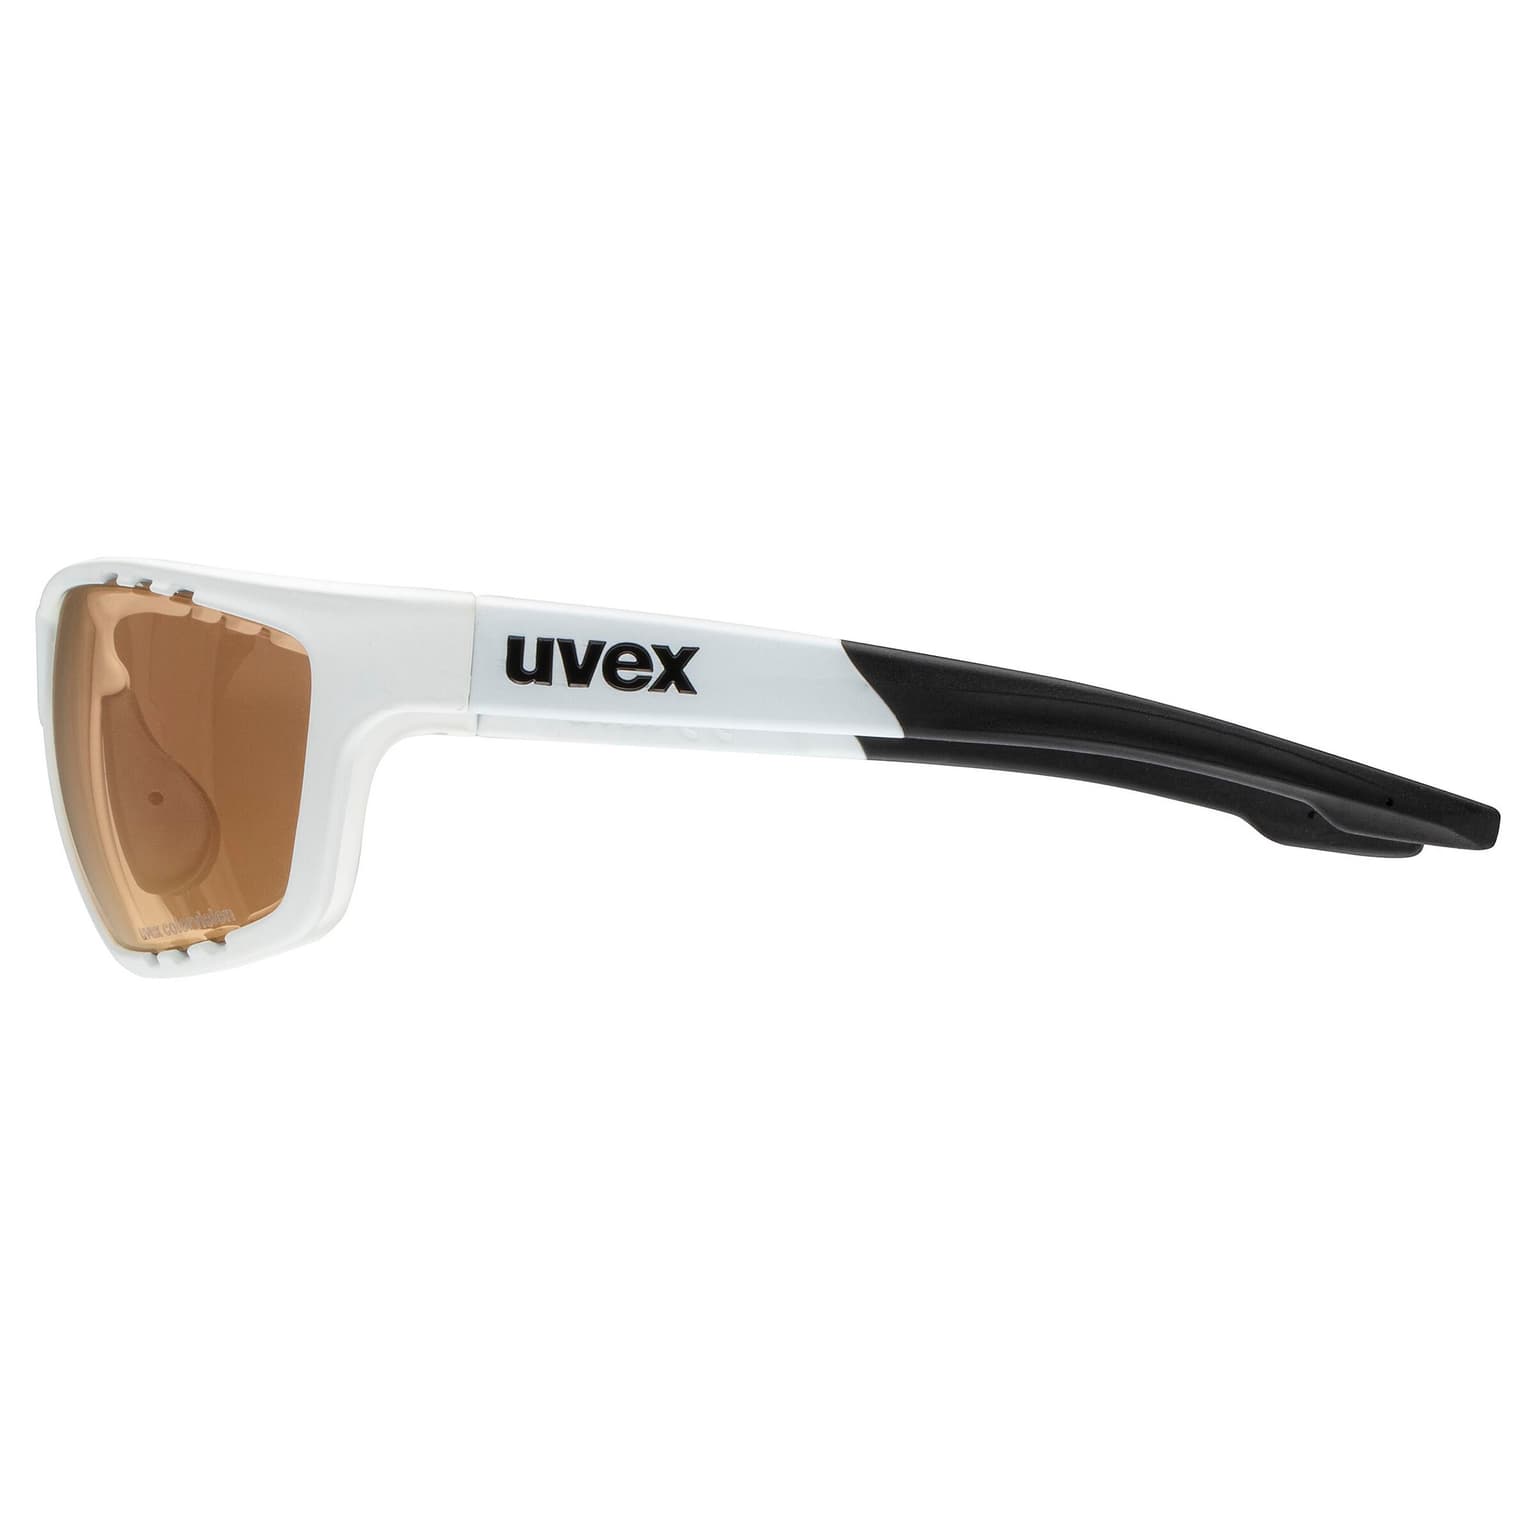 Uvex Uvex Colorvision Sportbrille weiss 2